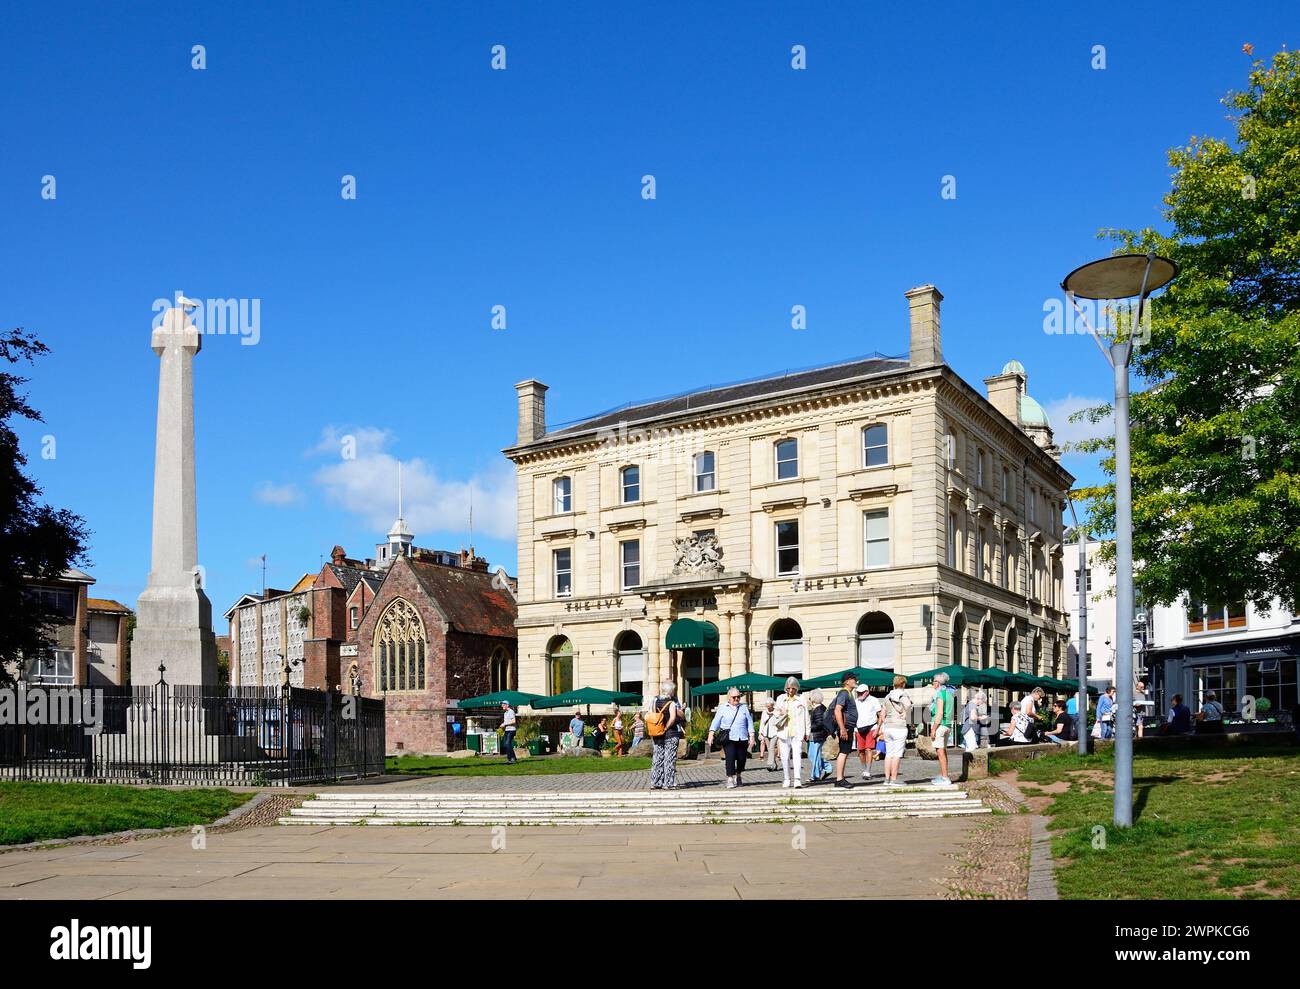 View of The Ivy Bistro and St Pentrock church along Cathedral Yard in the city centre, Exeter, Devon, UK, Europe. Stock Photo